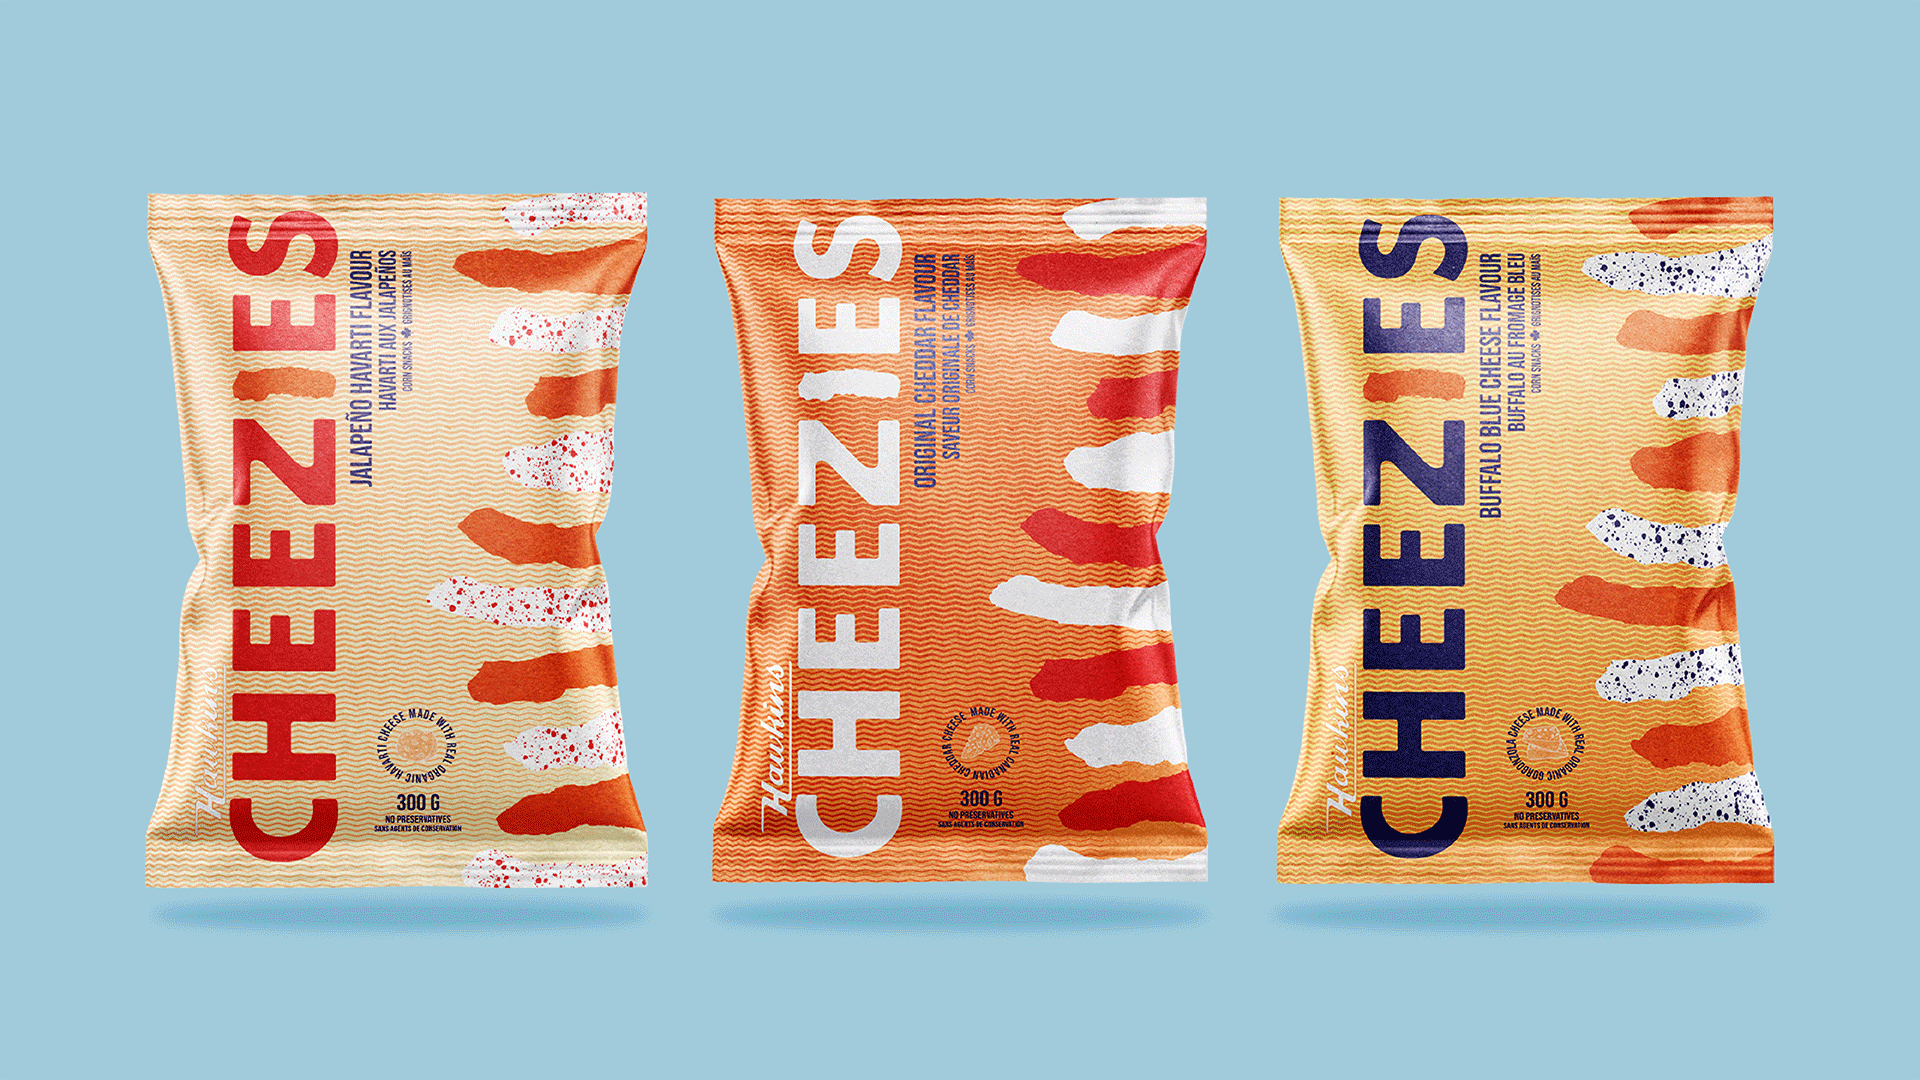 Three small foil bags of Cheezies sit on a light blue background. The bags primarily cream, orange and yellow with the word Cheezie written down the left side and illustrations of Cheezies on the right side.